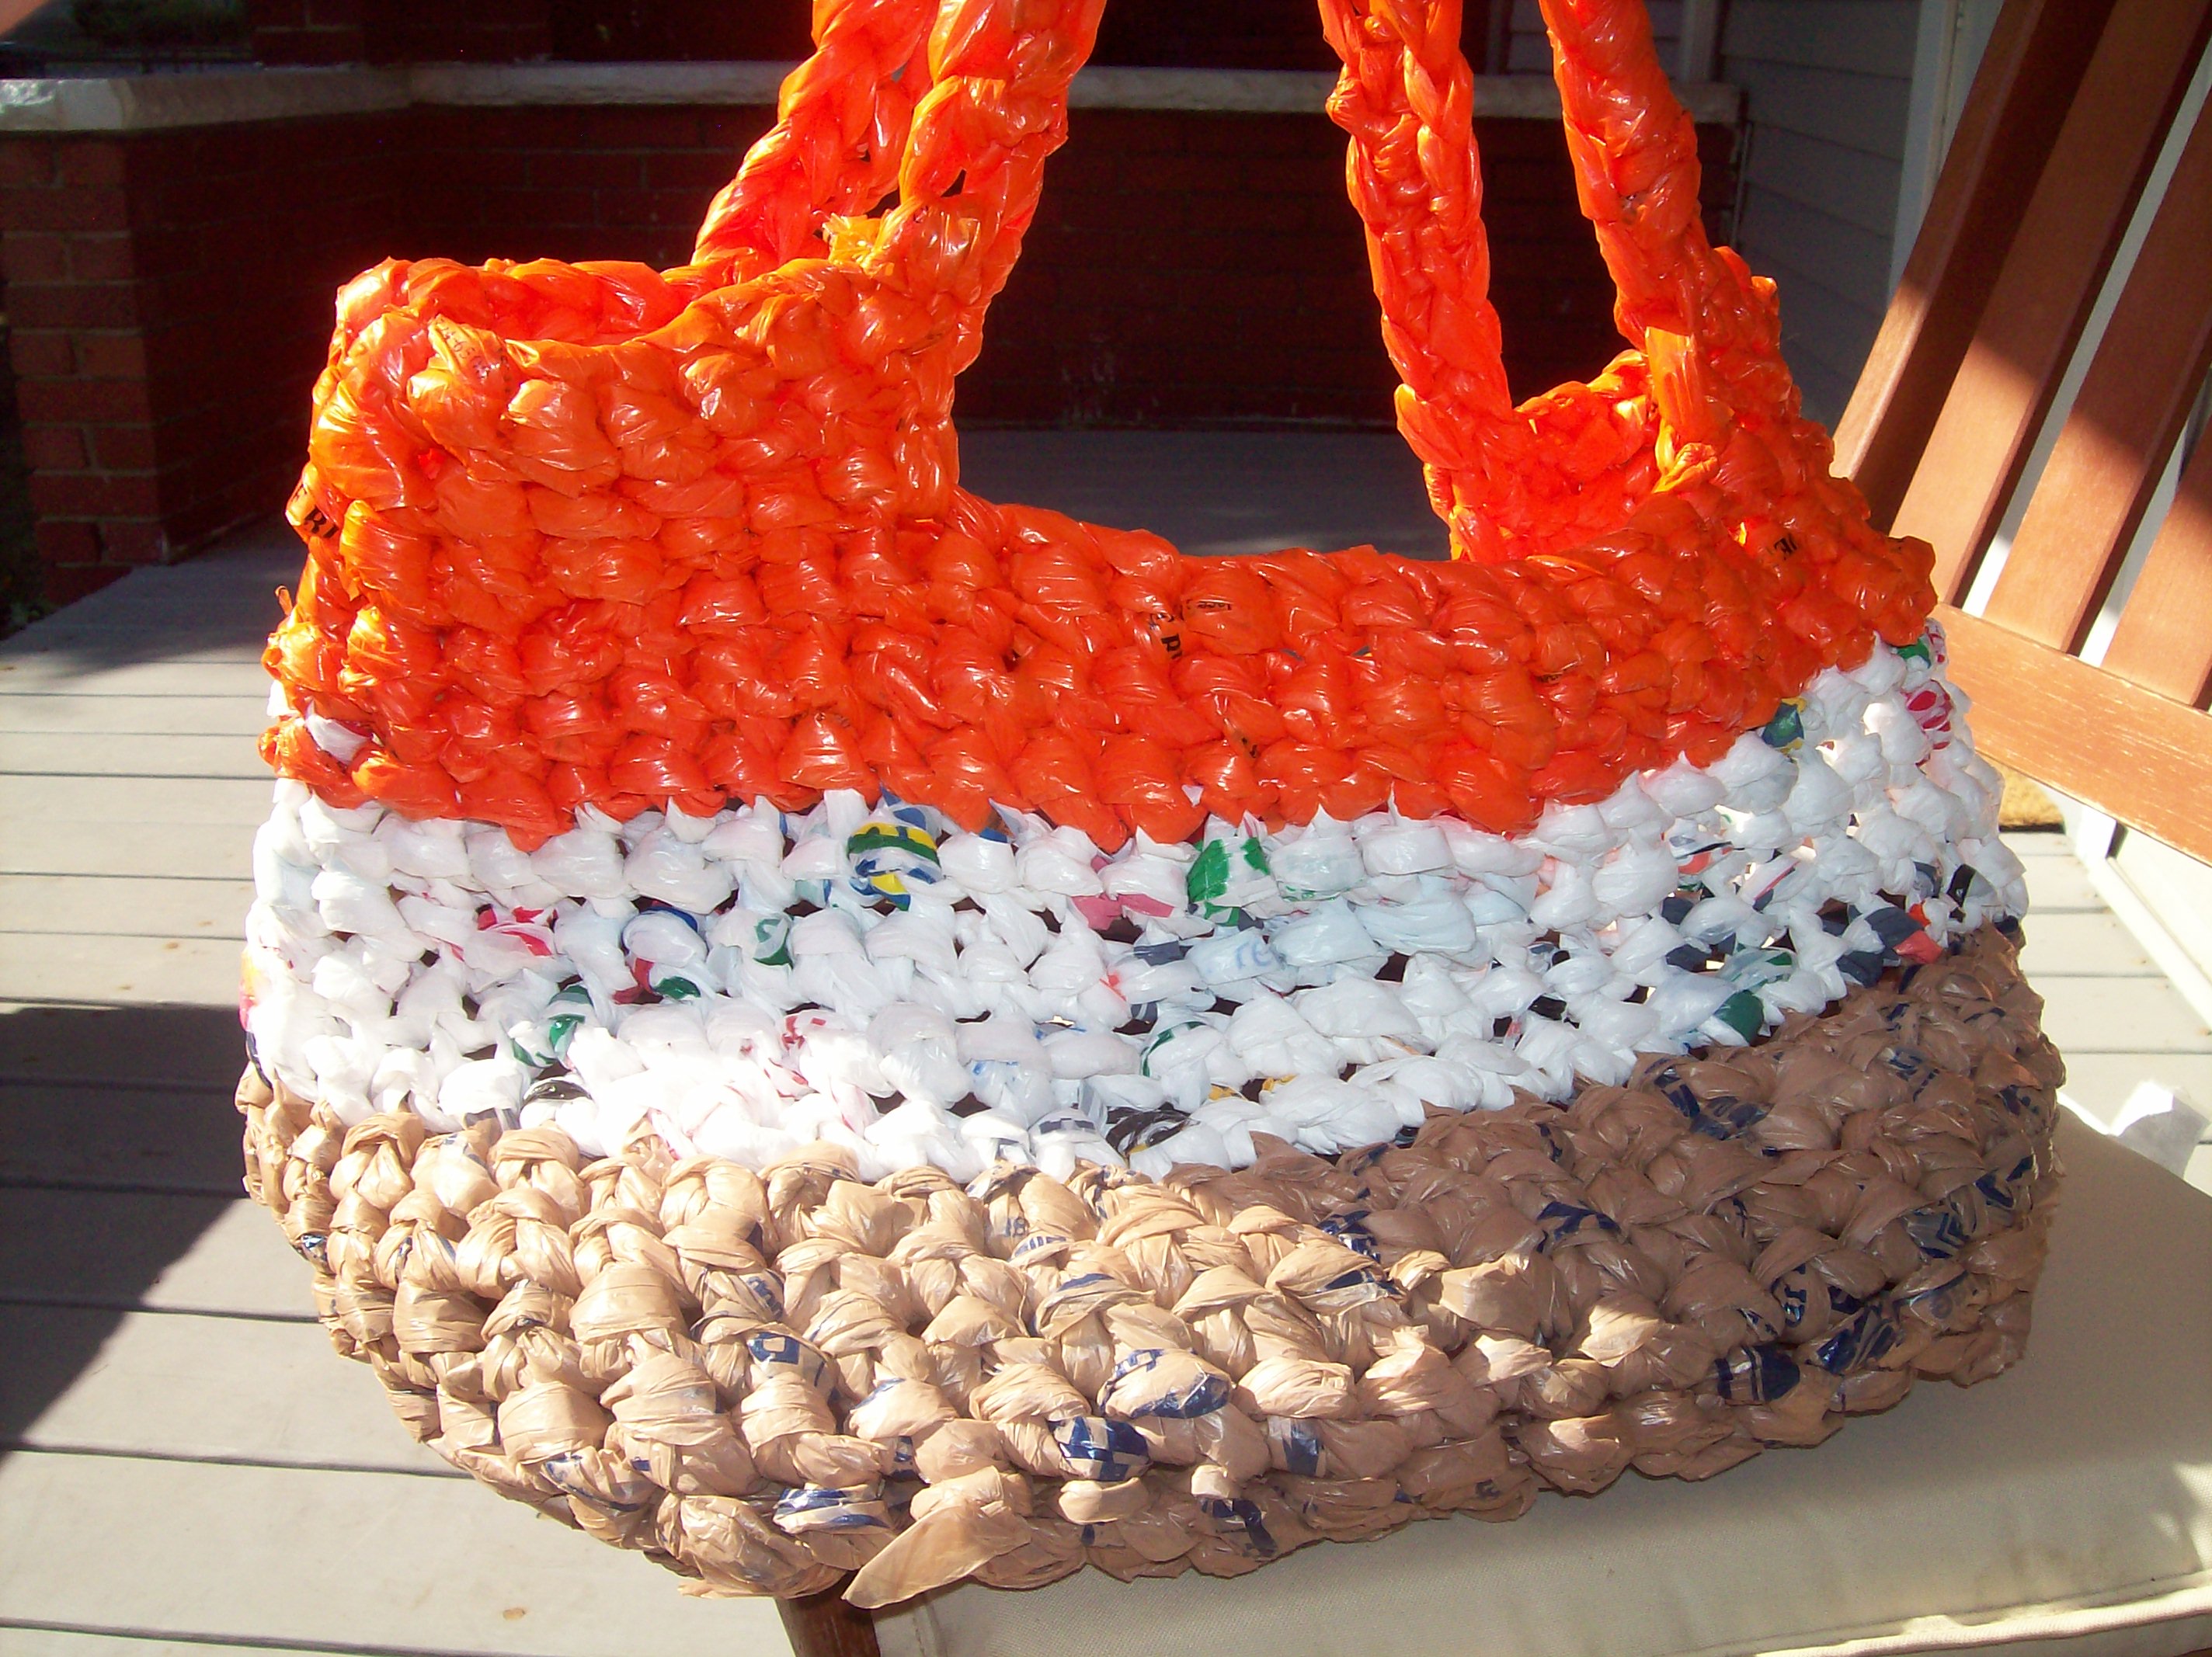 Crochet with Plastic Bags - Reuse Bags to Make a Colorful Bag and